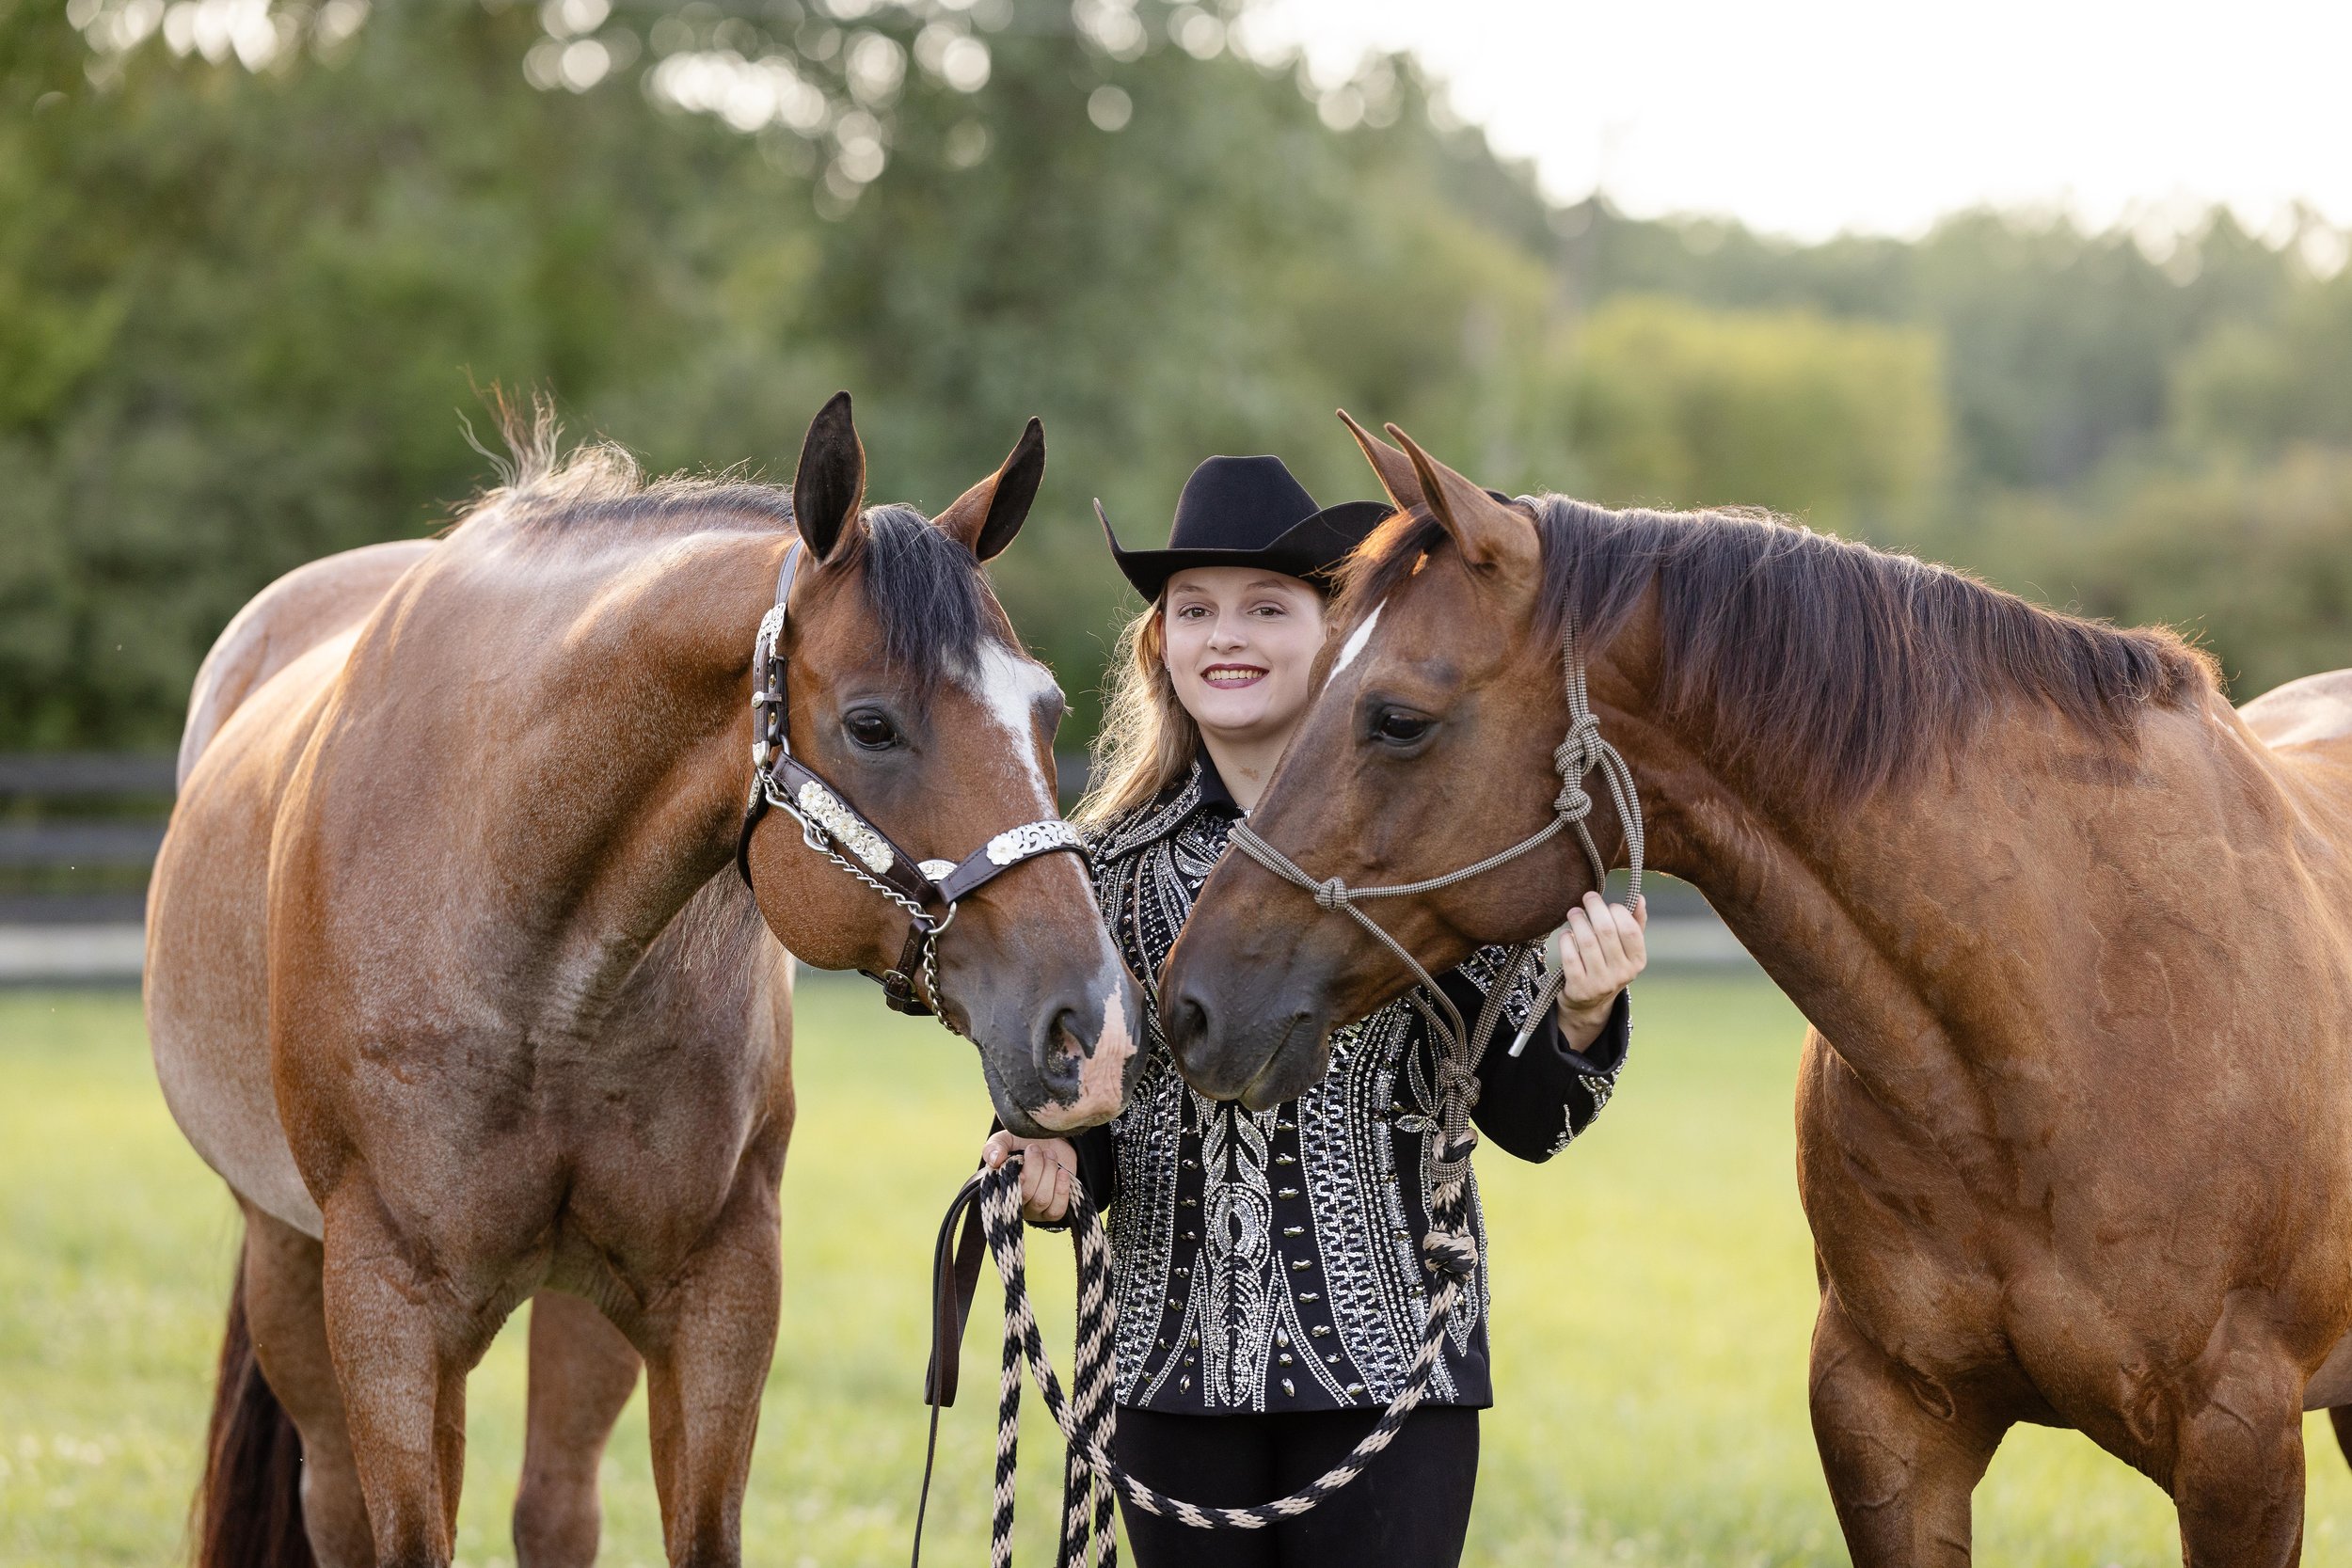 Senior Session with horses in Findlay, OH